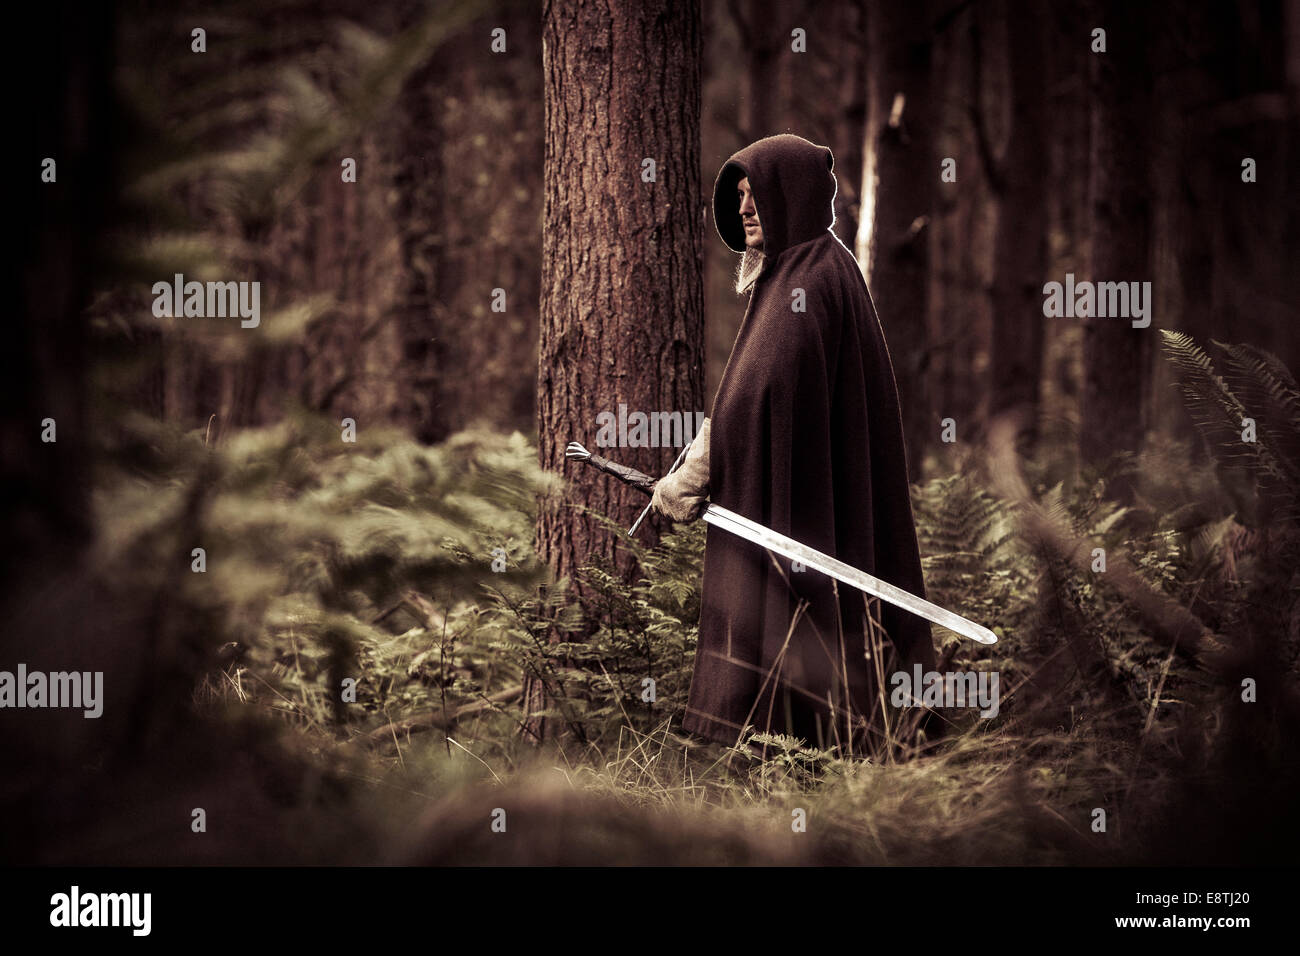 Deep in a forest a Warrior stands ready. Stock Photo